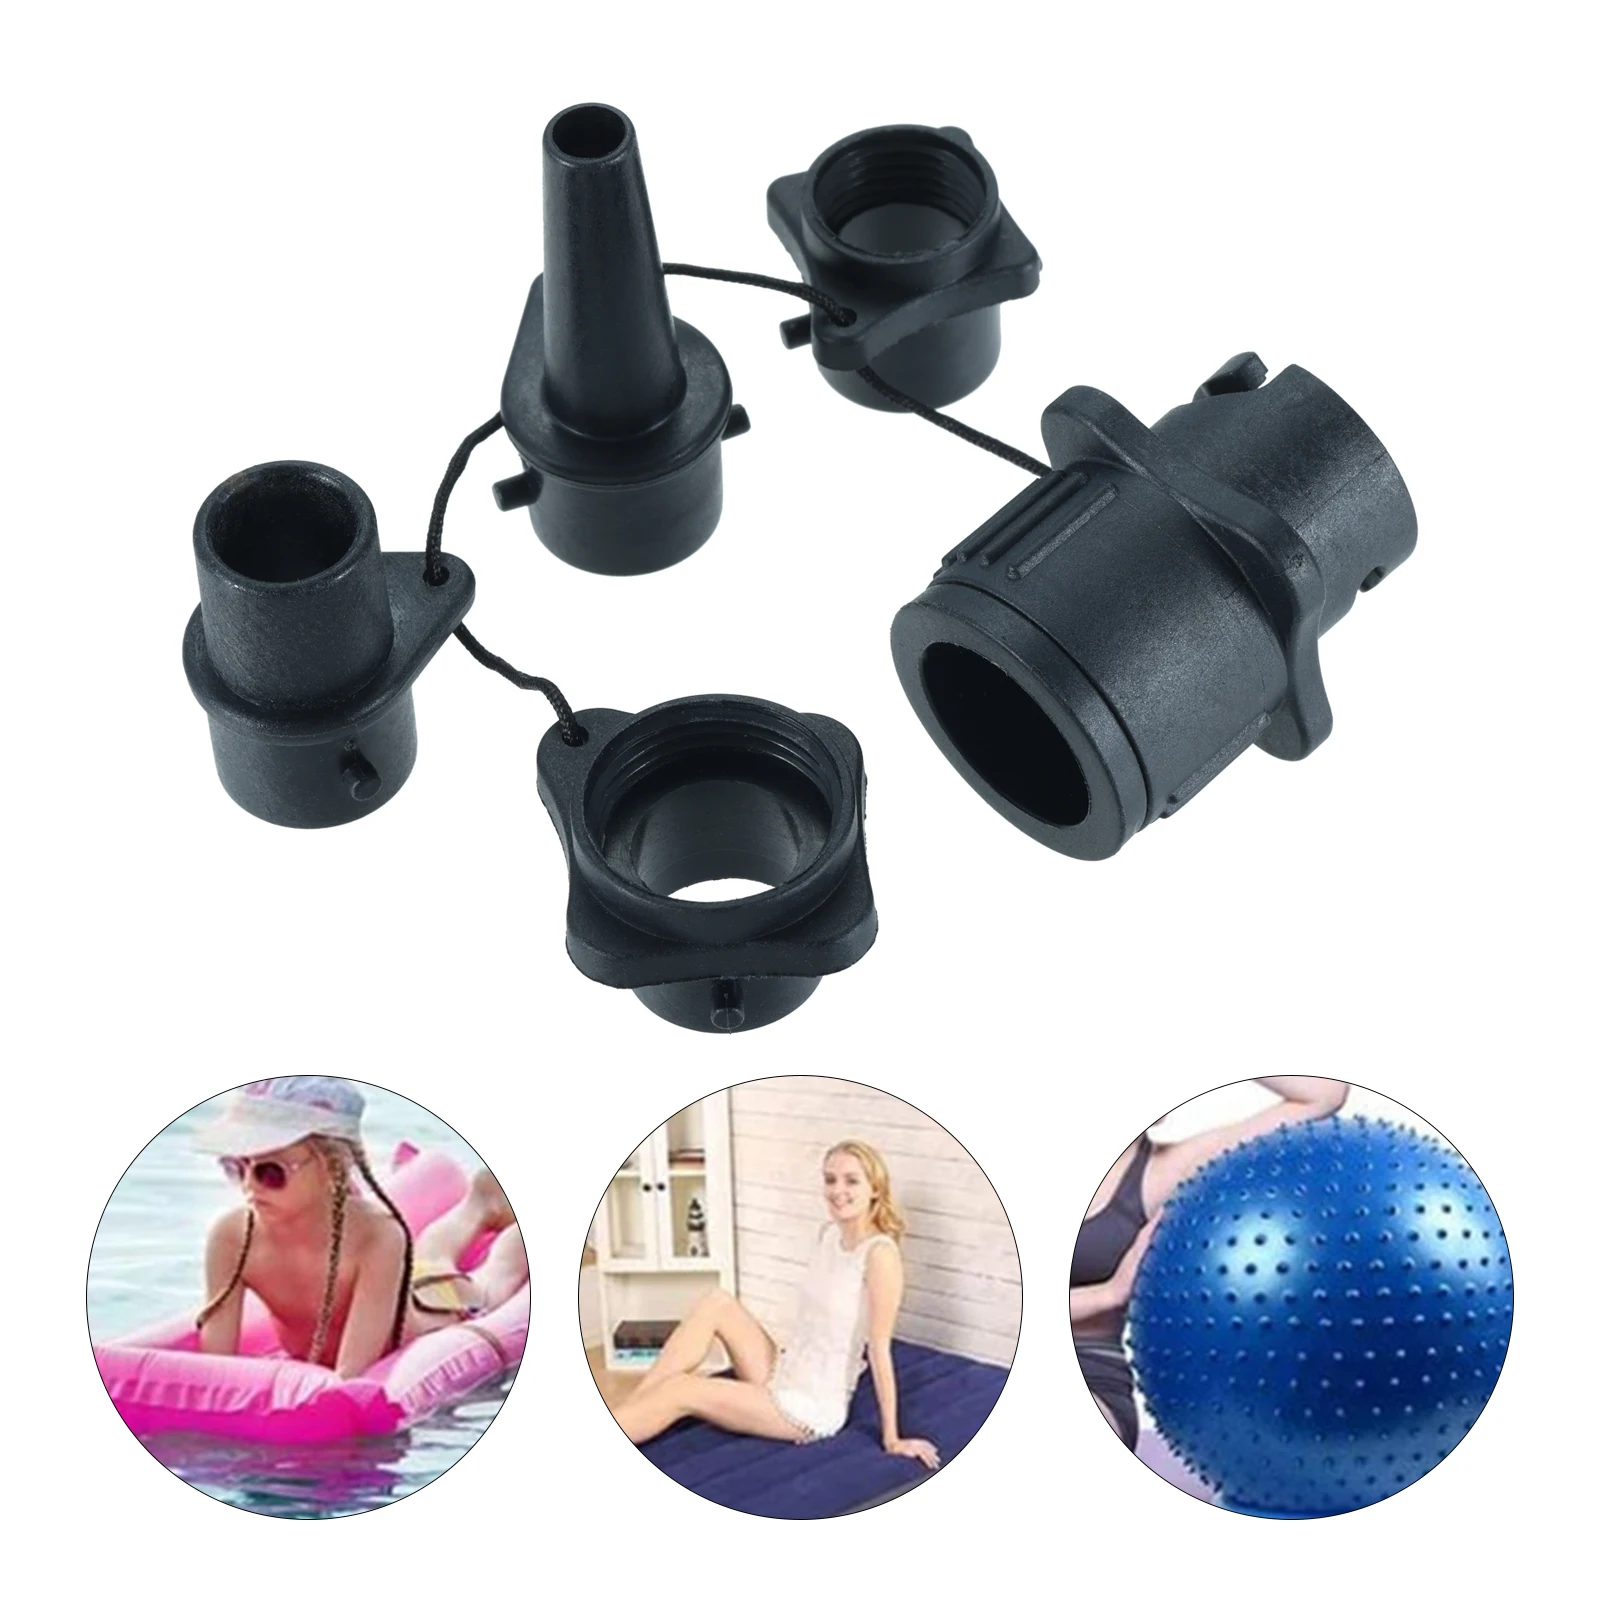 1 Set Air Valve Nozzle Adapter Kit Black Plastic Multi-Function Hose Connector Surf Paddle Board Canoe Inflatable Boat Accessory